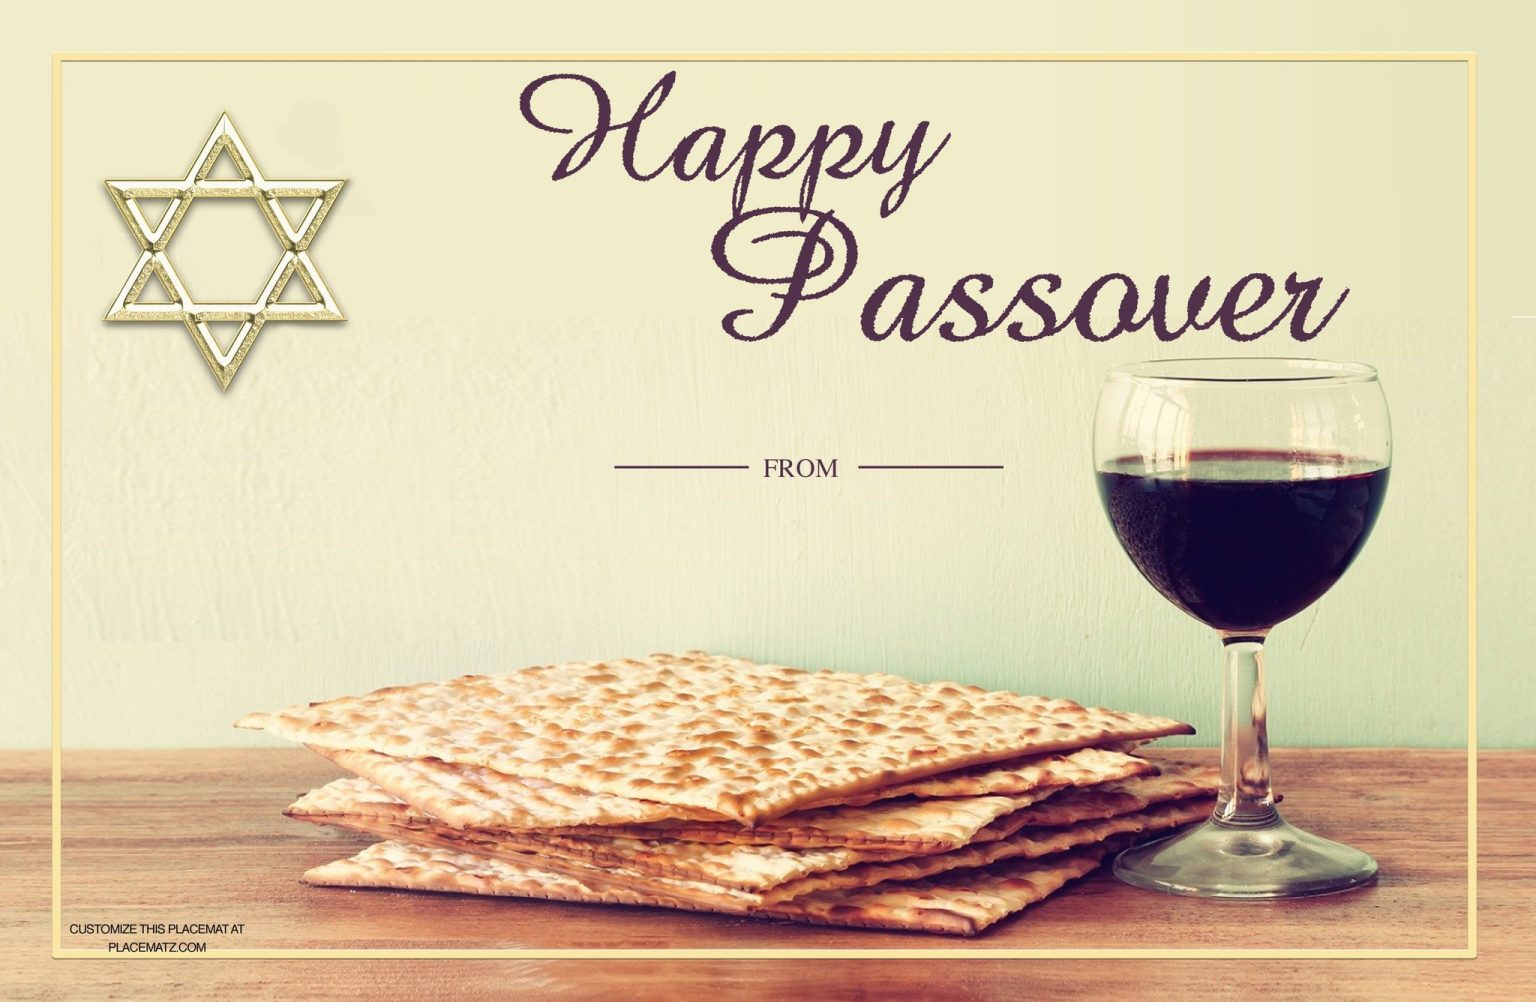 [30+] Happy Passover Images 2020, Pics & Wallpapers Inspiring Wishes